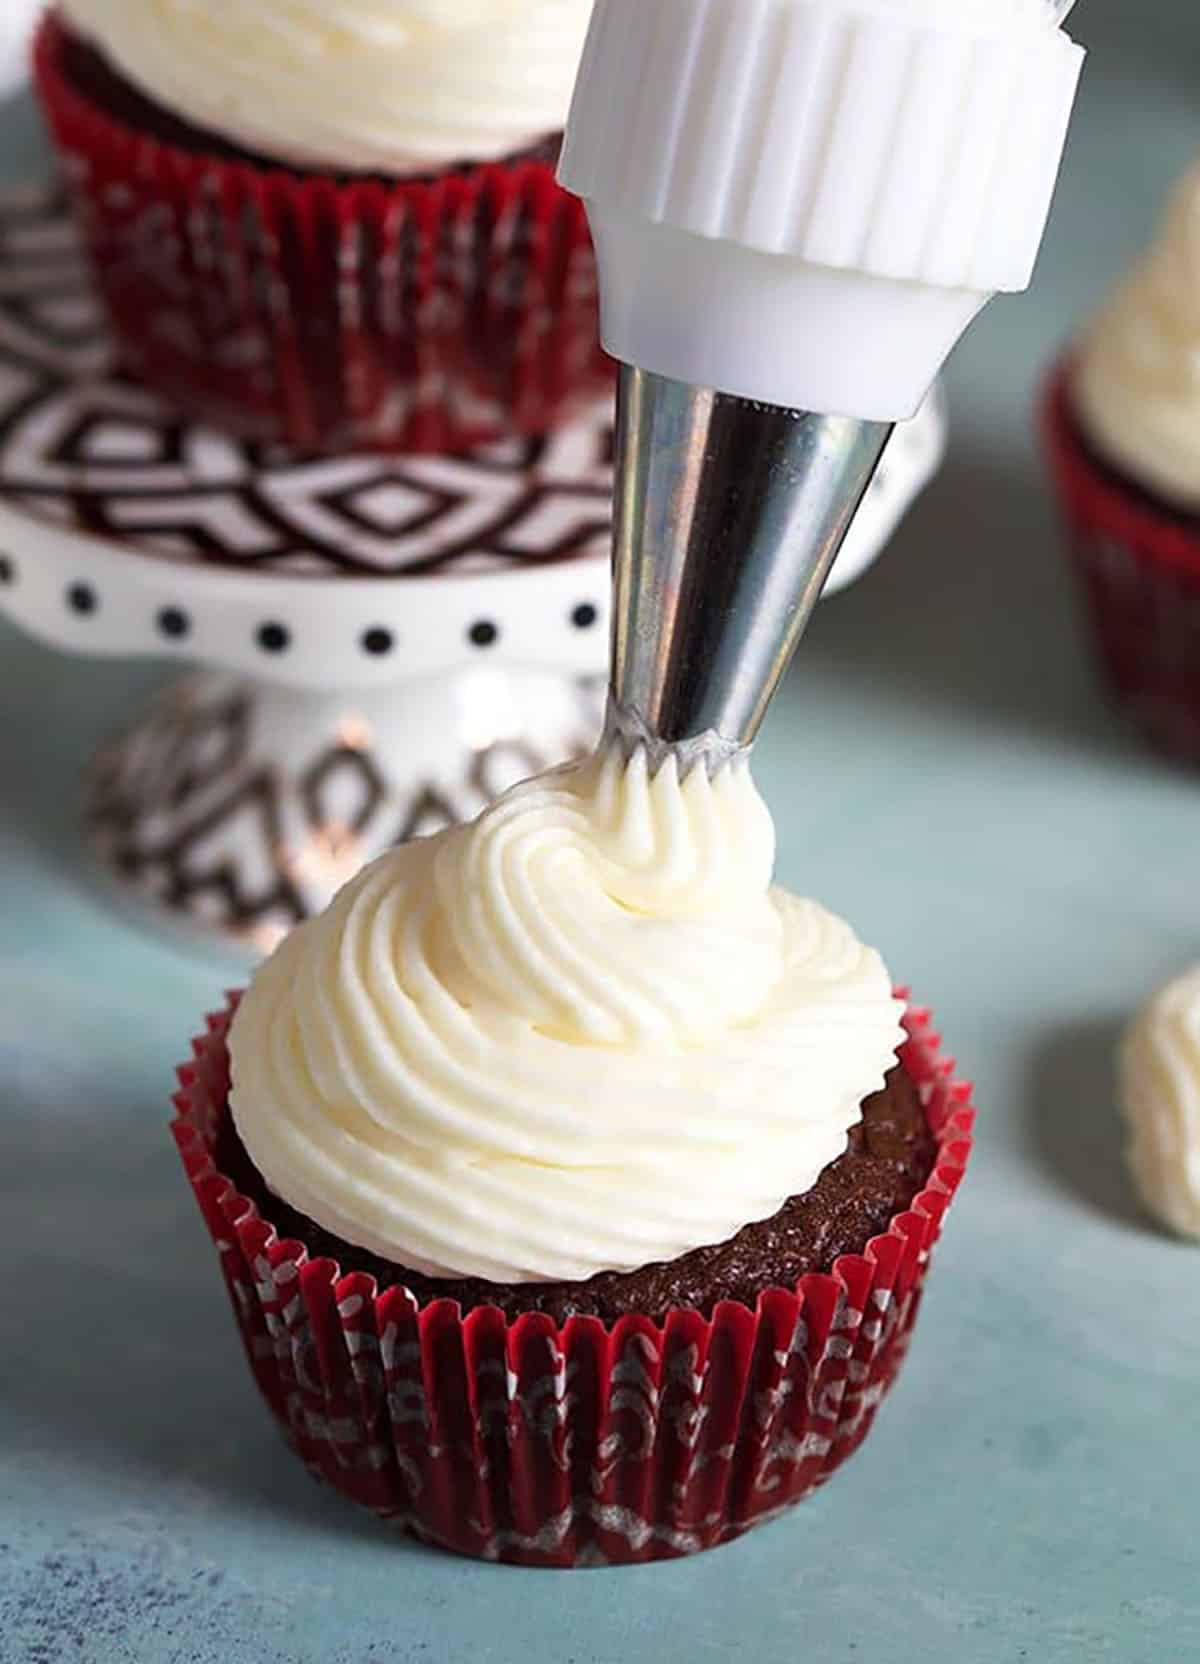 Chocolate cupcakes with whipped cream cheese frosting.